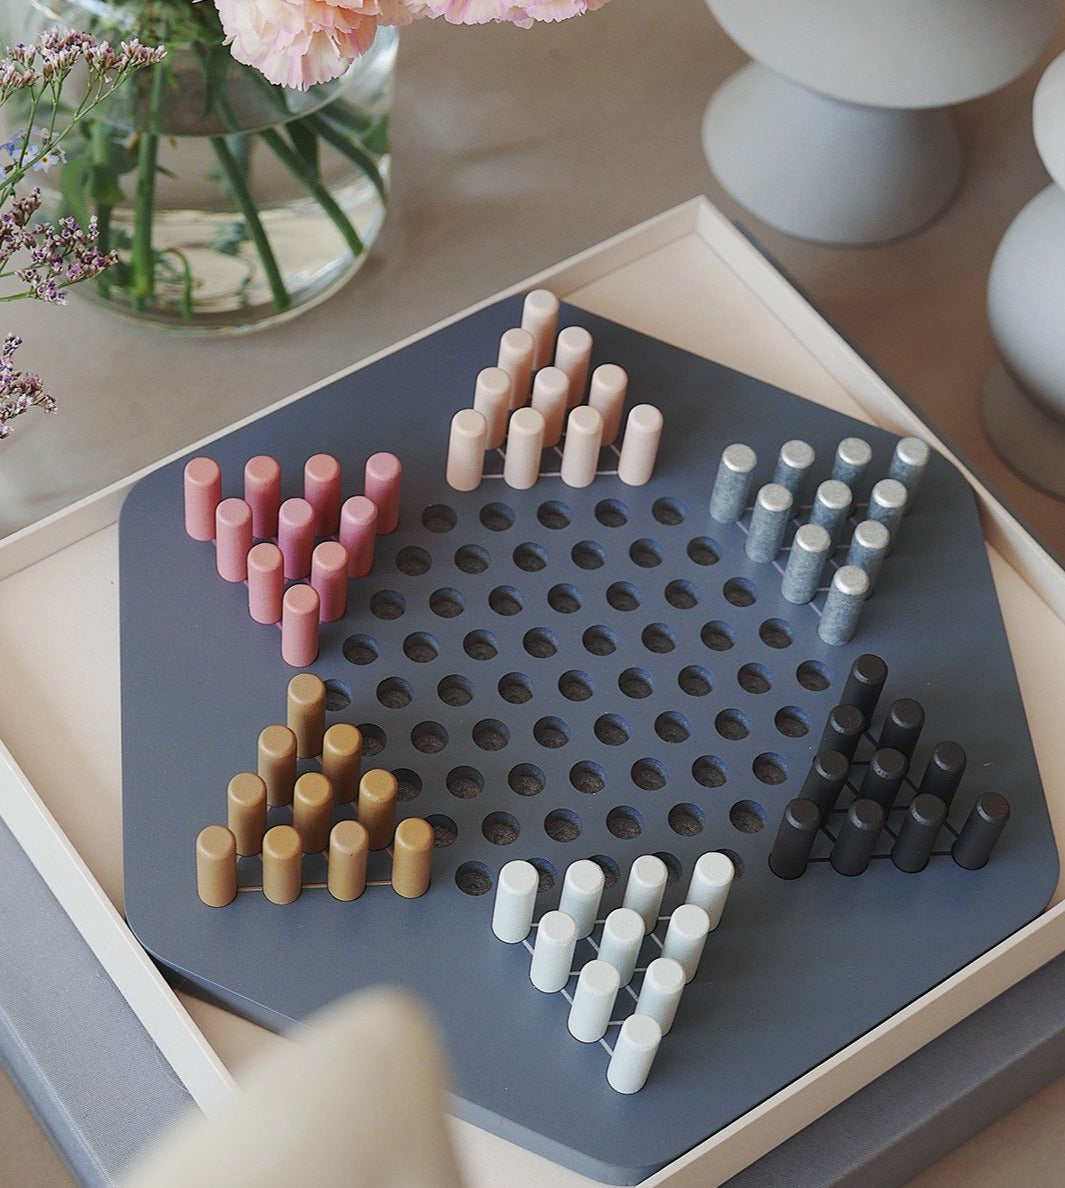 Classic Games Chinese Checkers